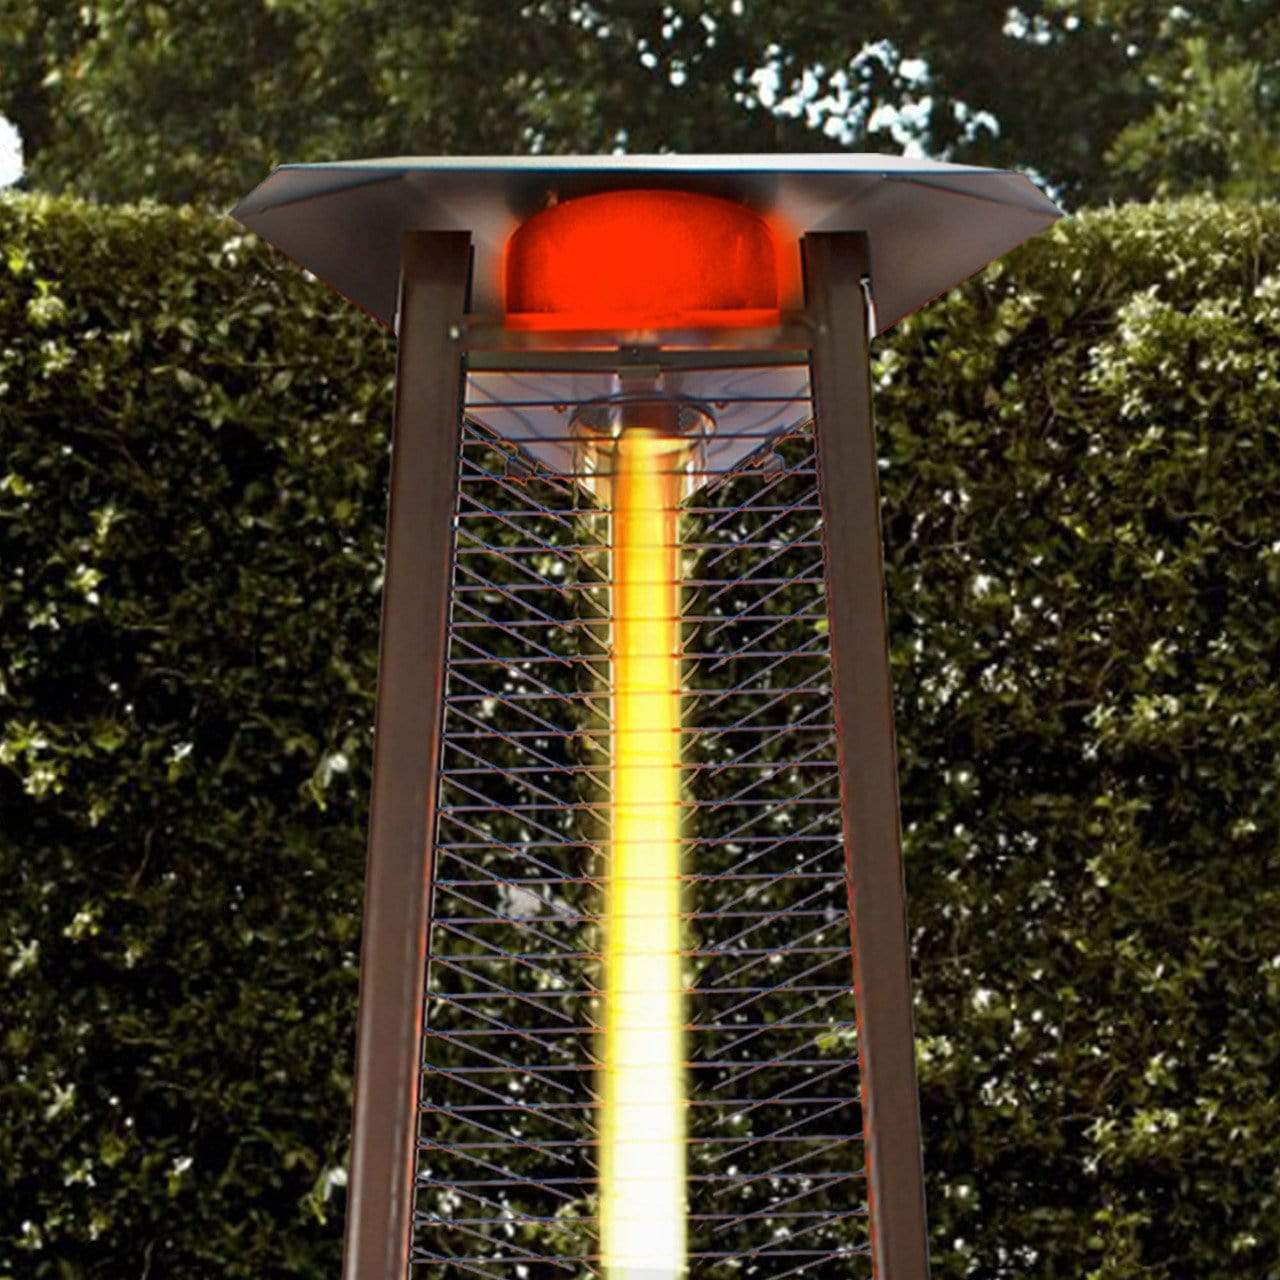 Lava Heat Italia Tower Patio Heater The LAVAlite Triangle Flame Tower Heater,  92.5", 56,000 BTU, Electronic Ignition, Hammered Black, Bronze, Stainless Steel - Liquid Propane OR Natural Gas